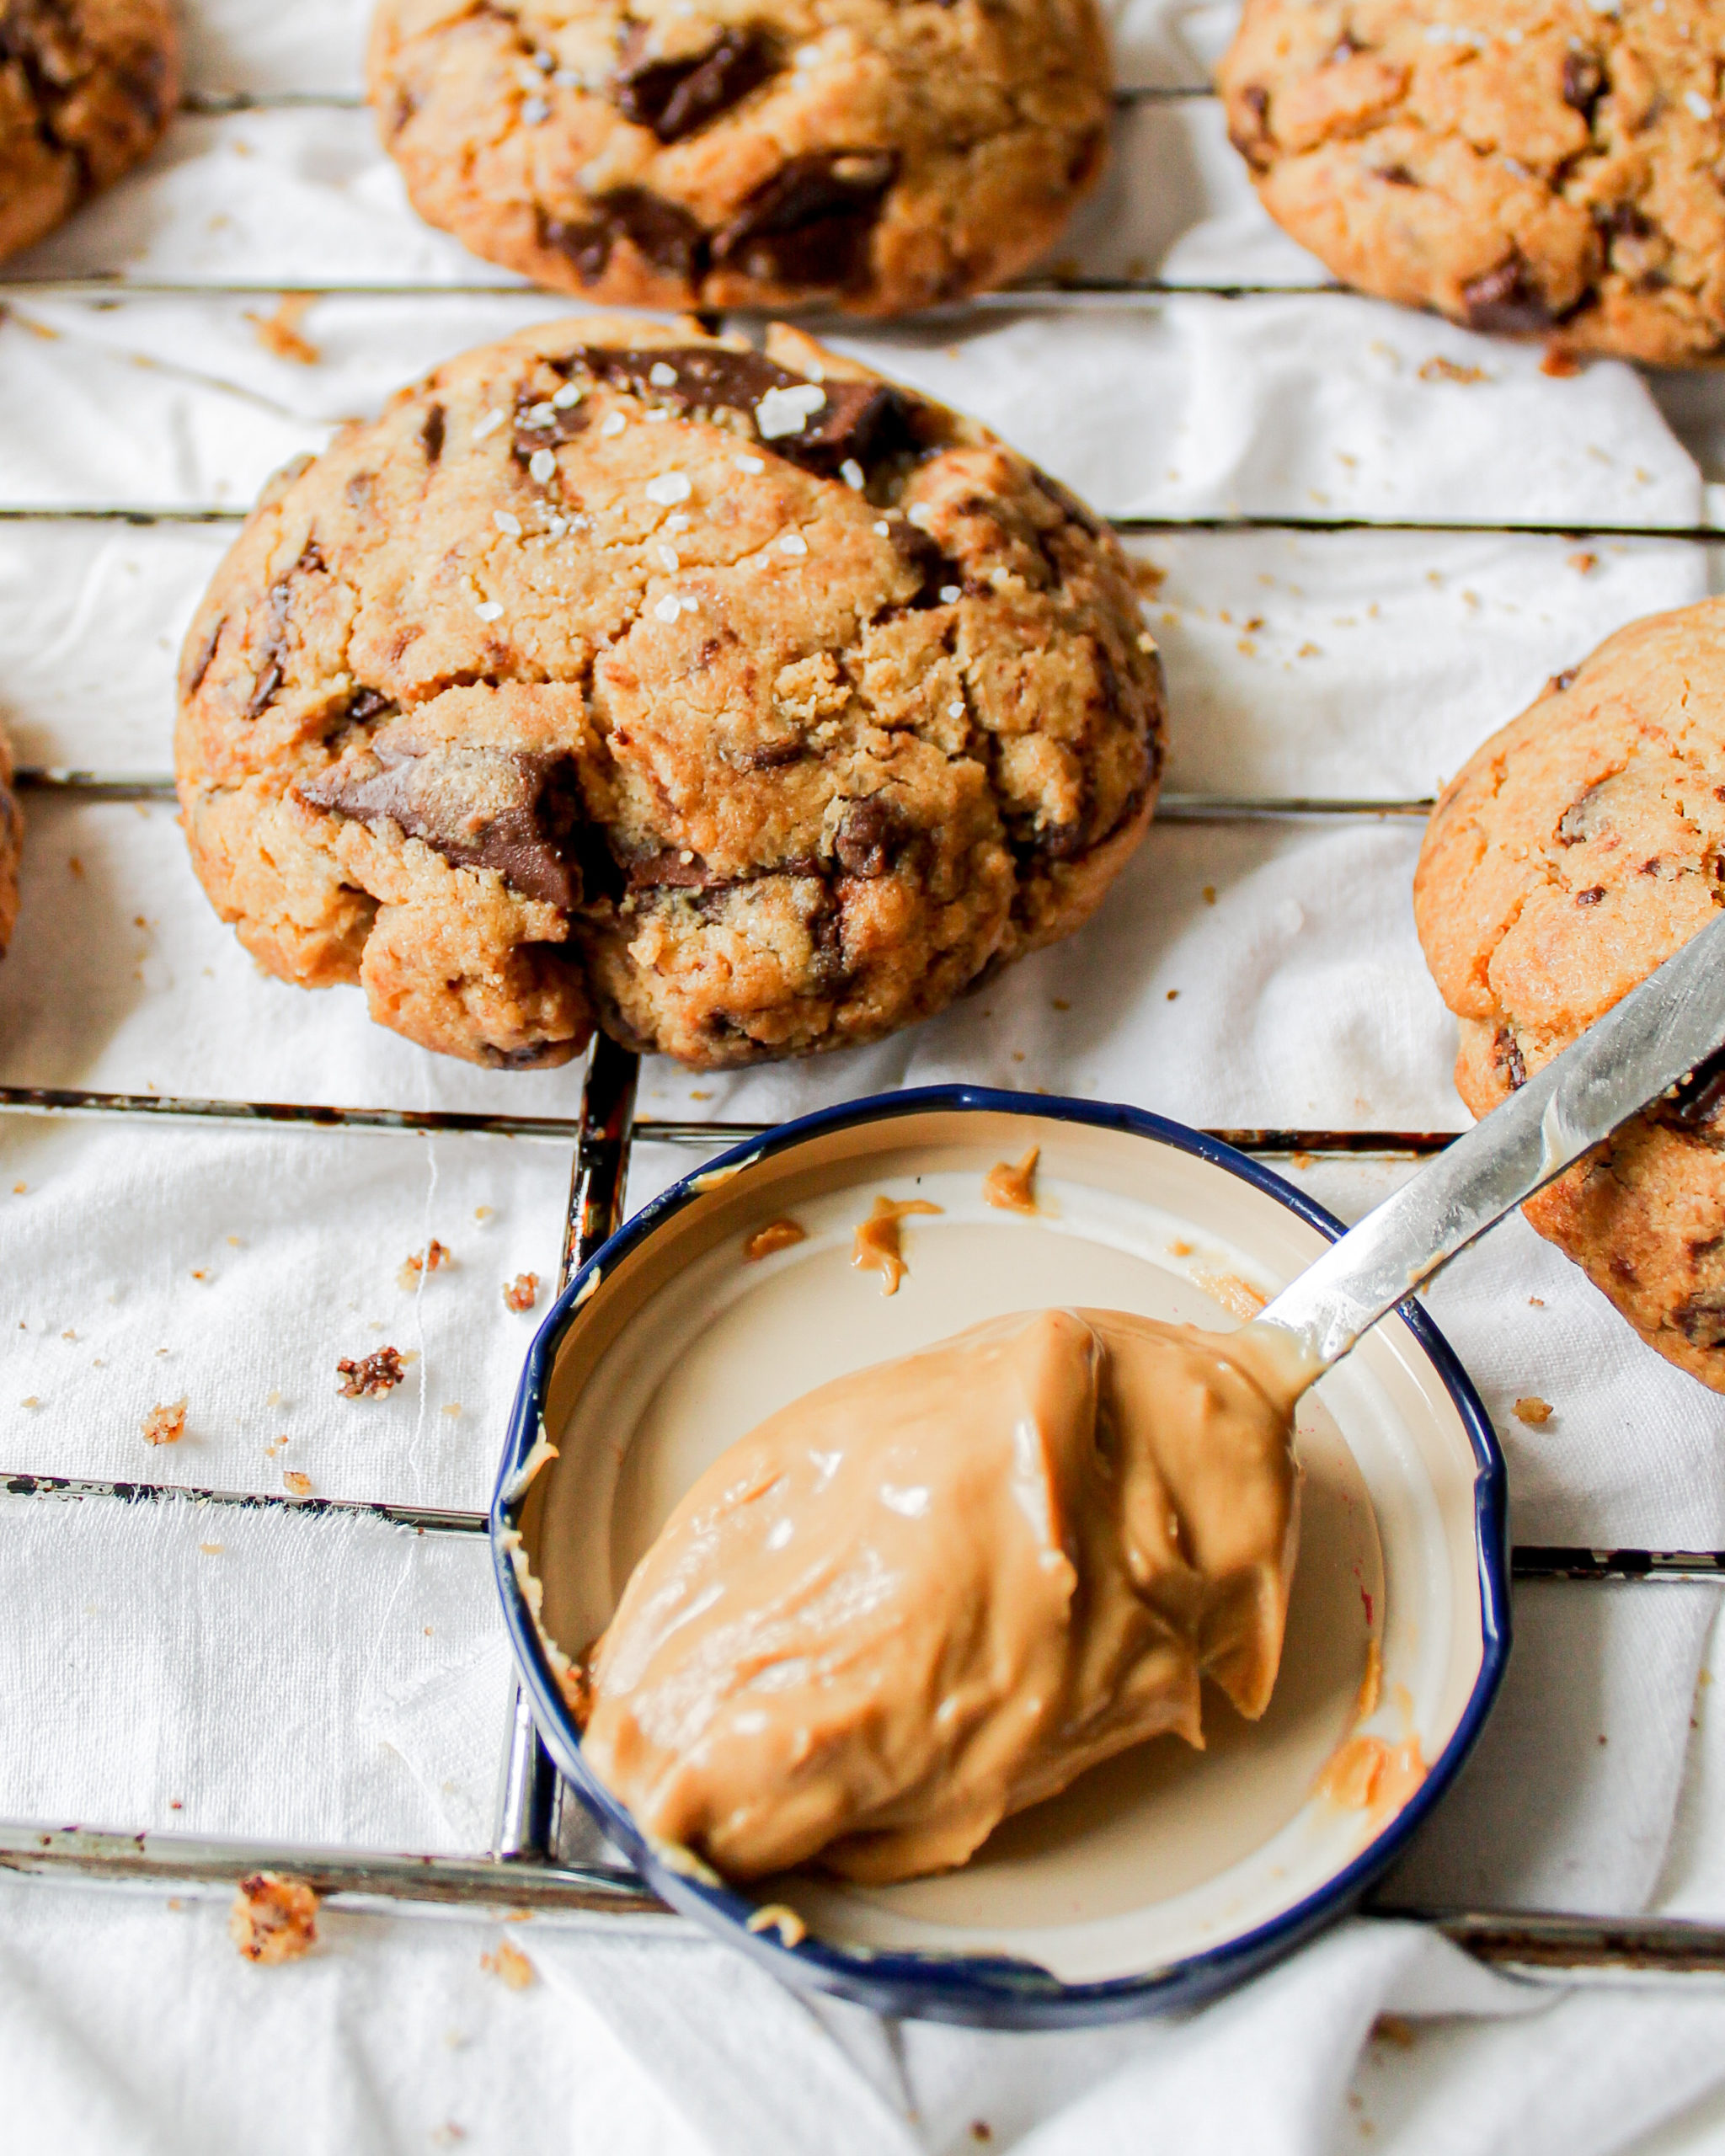 Cookies With Peanut Butter
